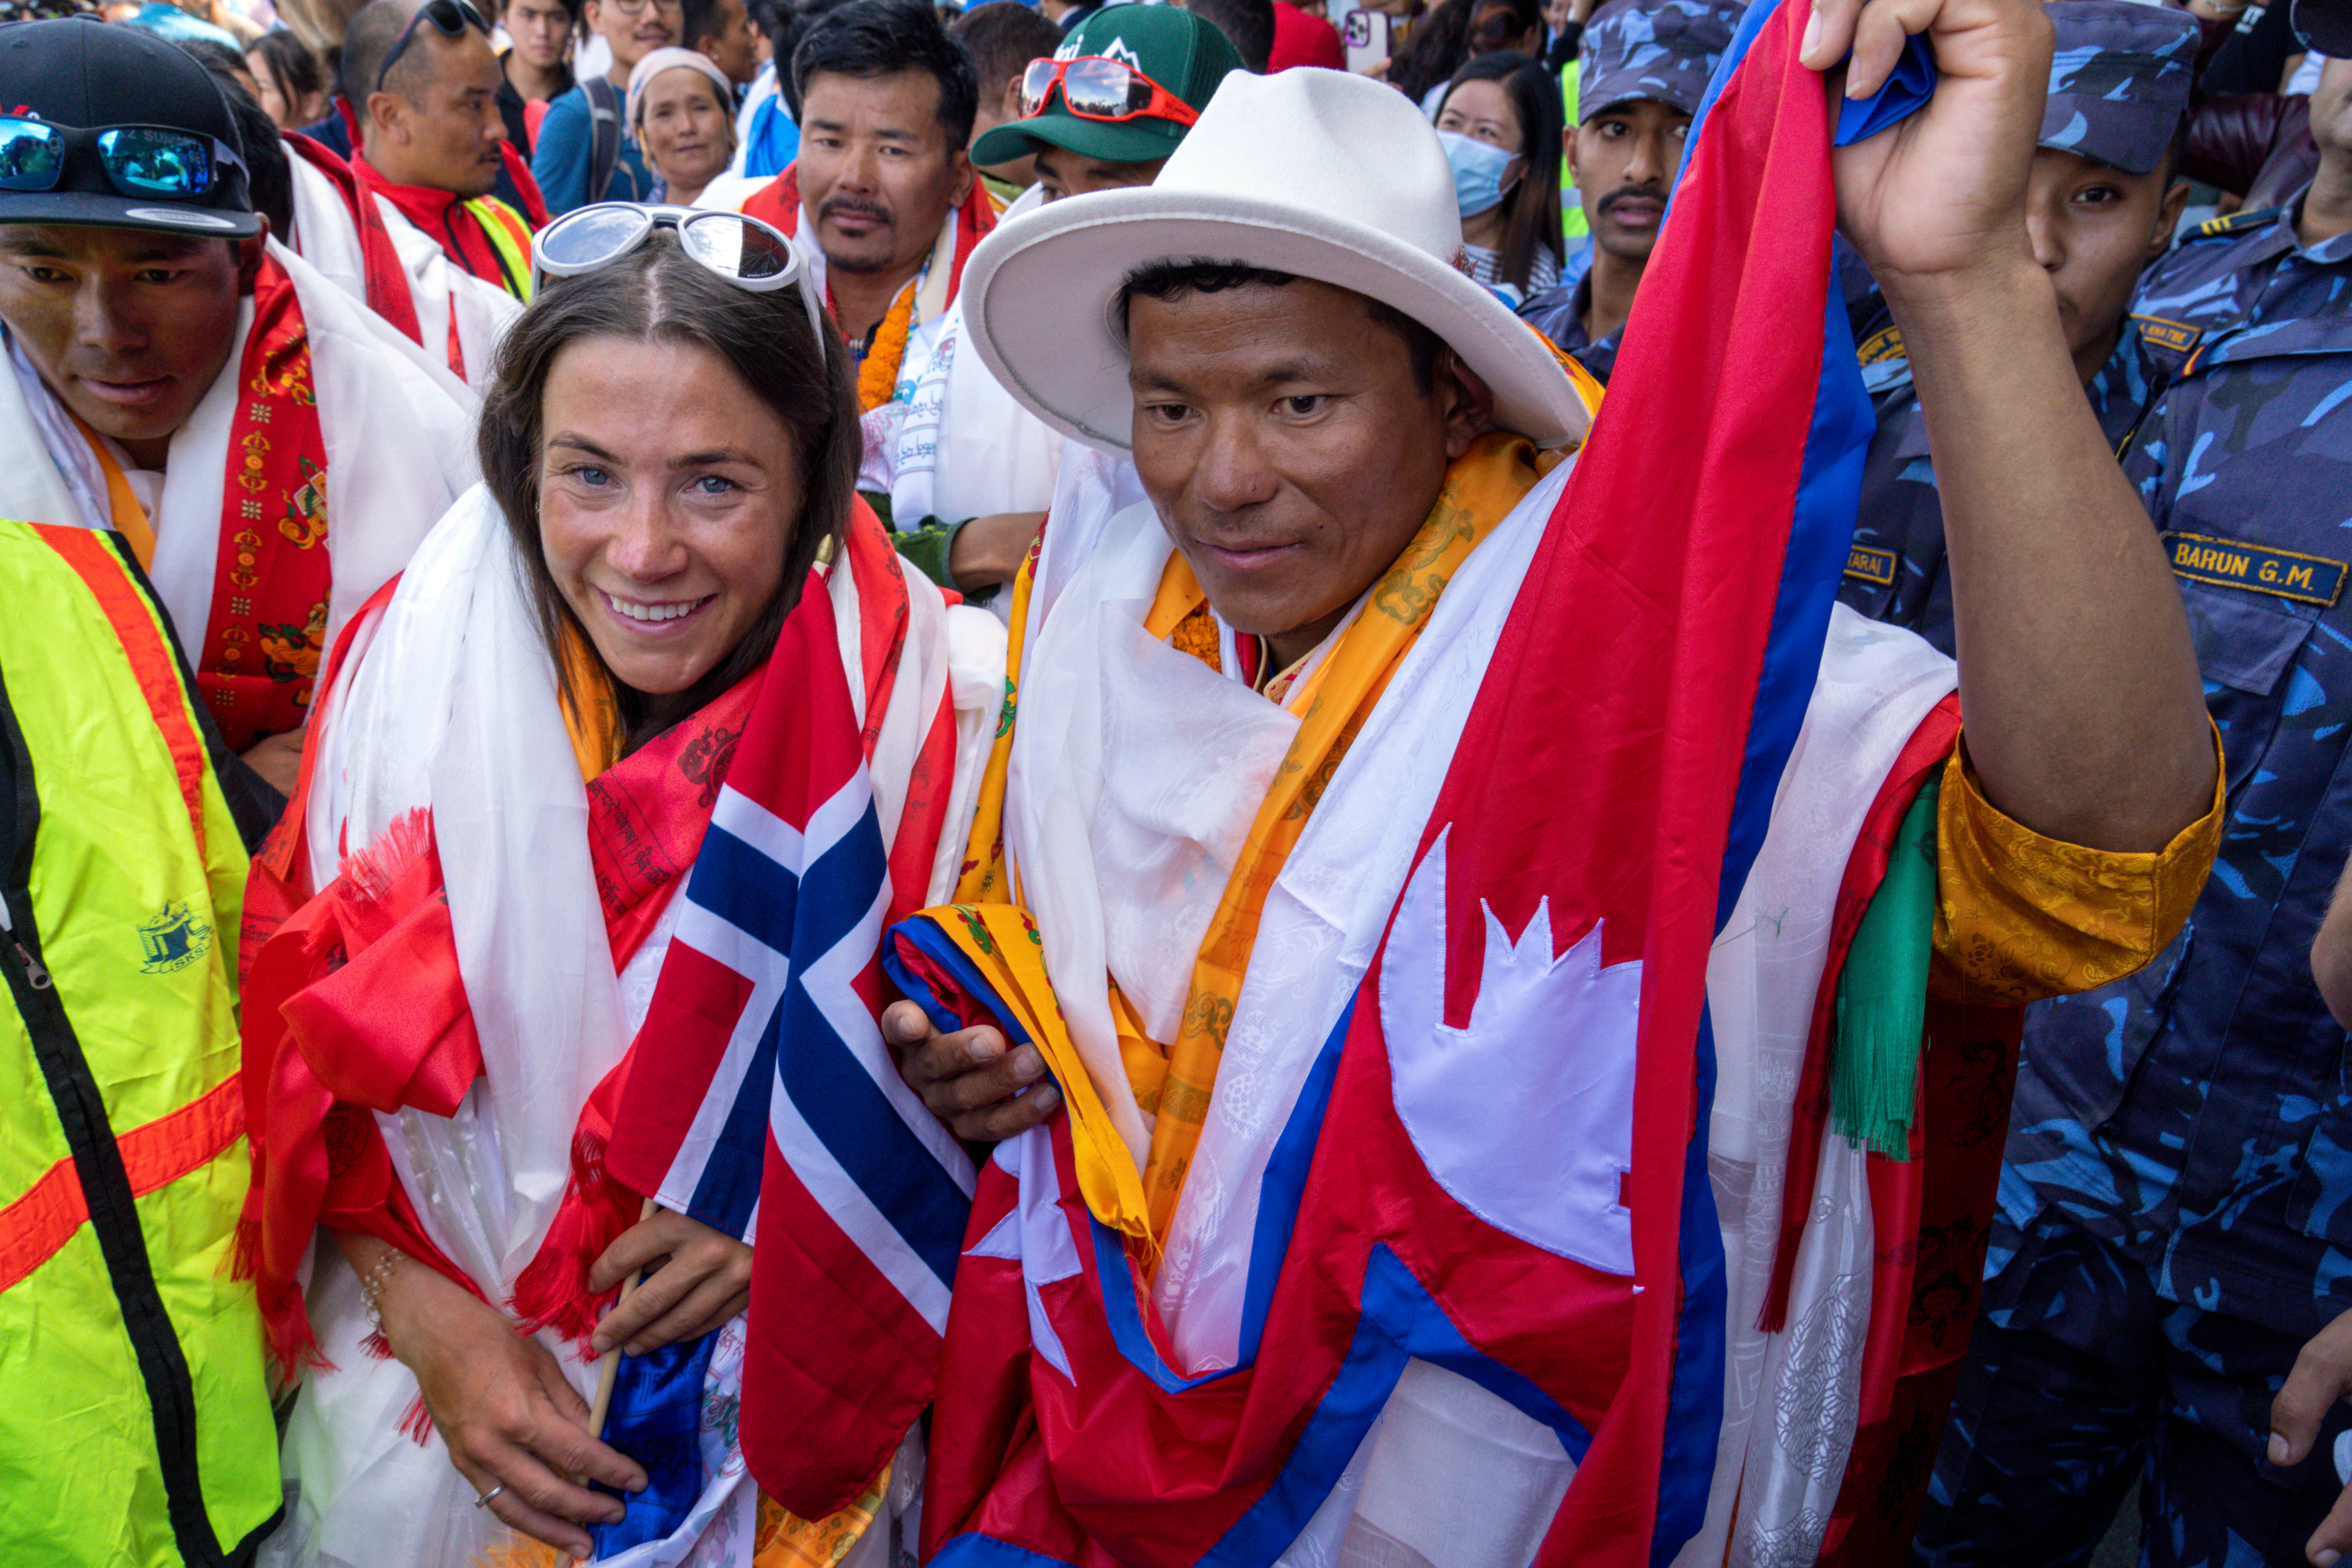 Norwegian climber Kristin Harila, left, and her Nepali sherpa guide Tenjen Sherpa, right, who climbed the world's 14 tallest mountains in record time